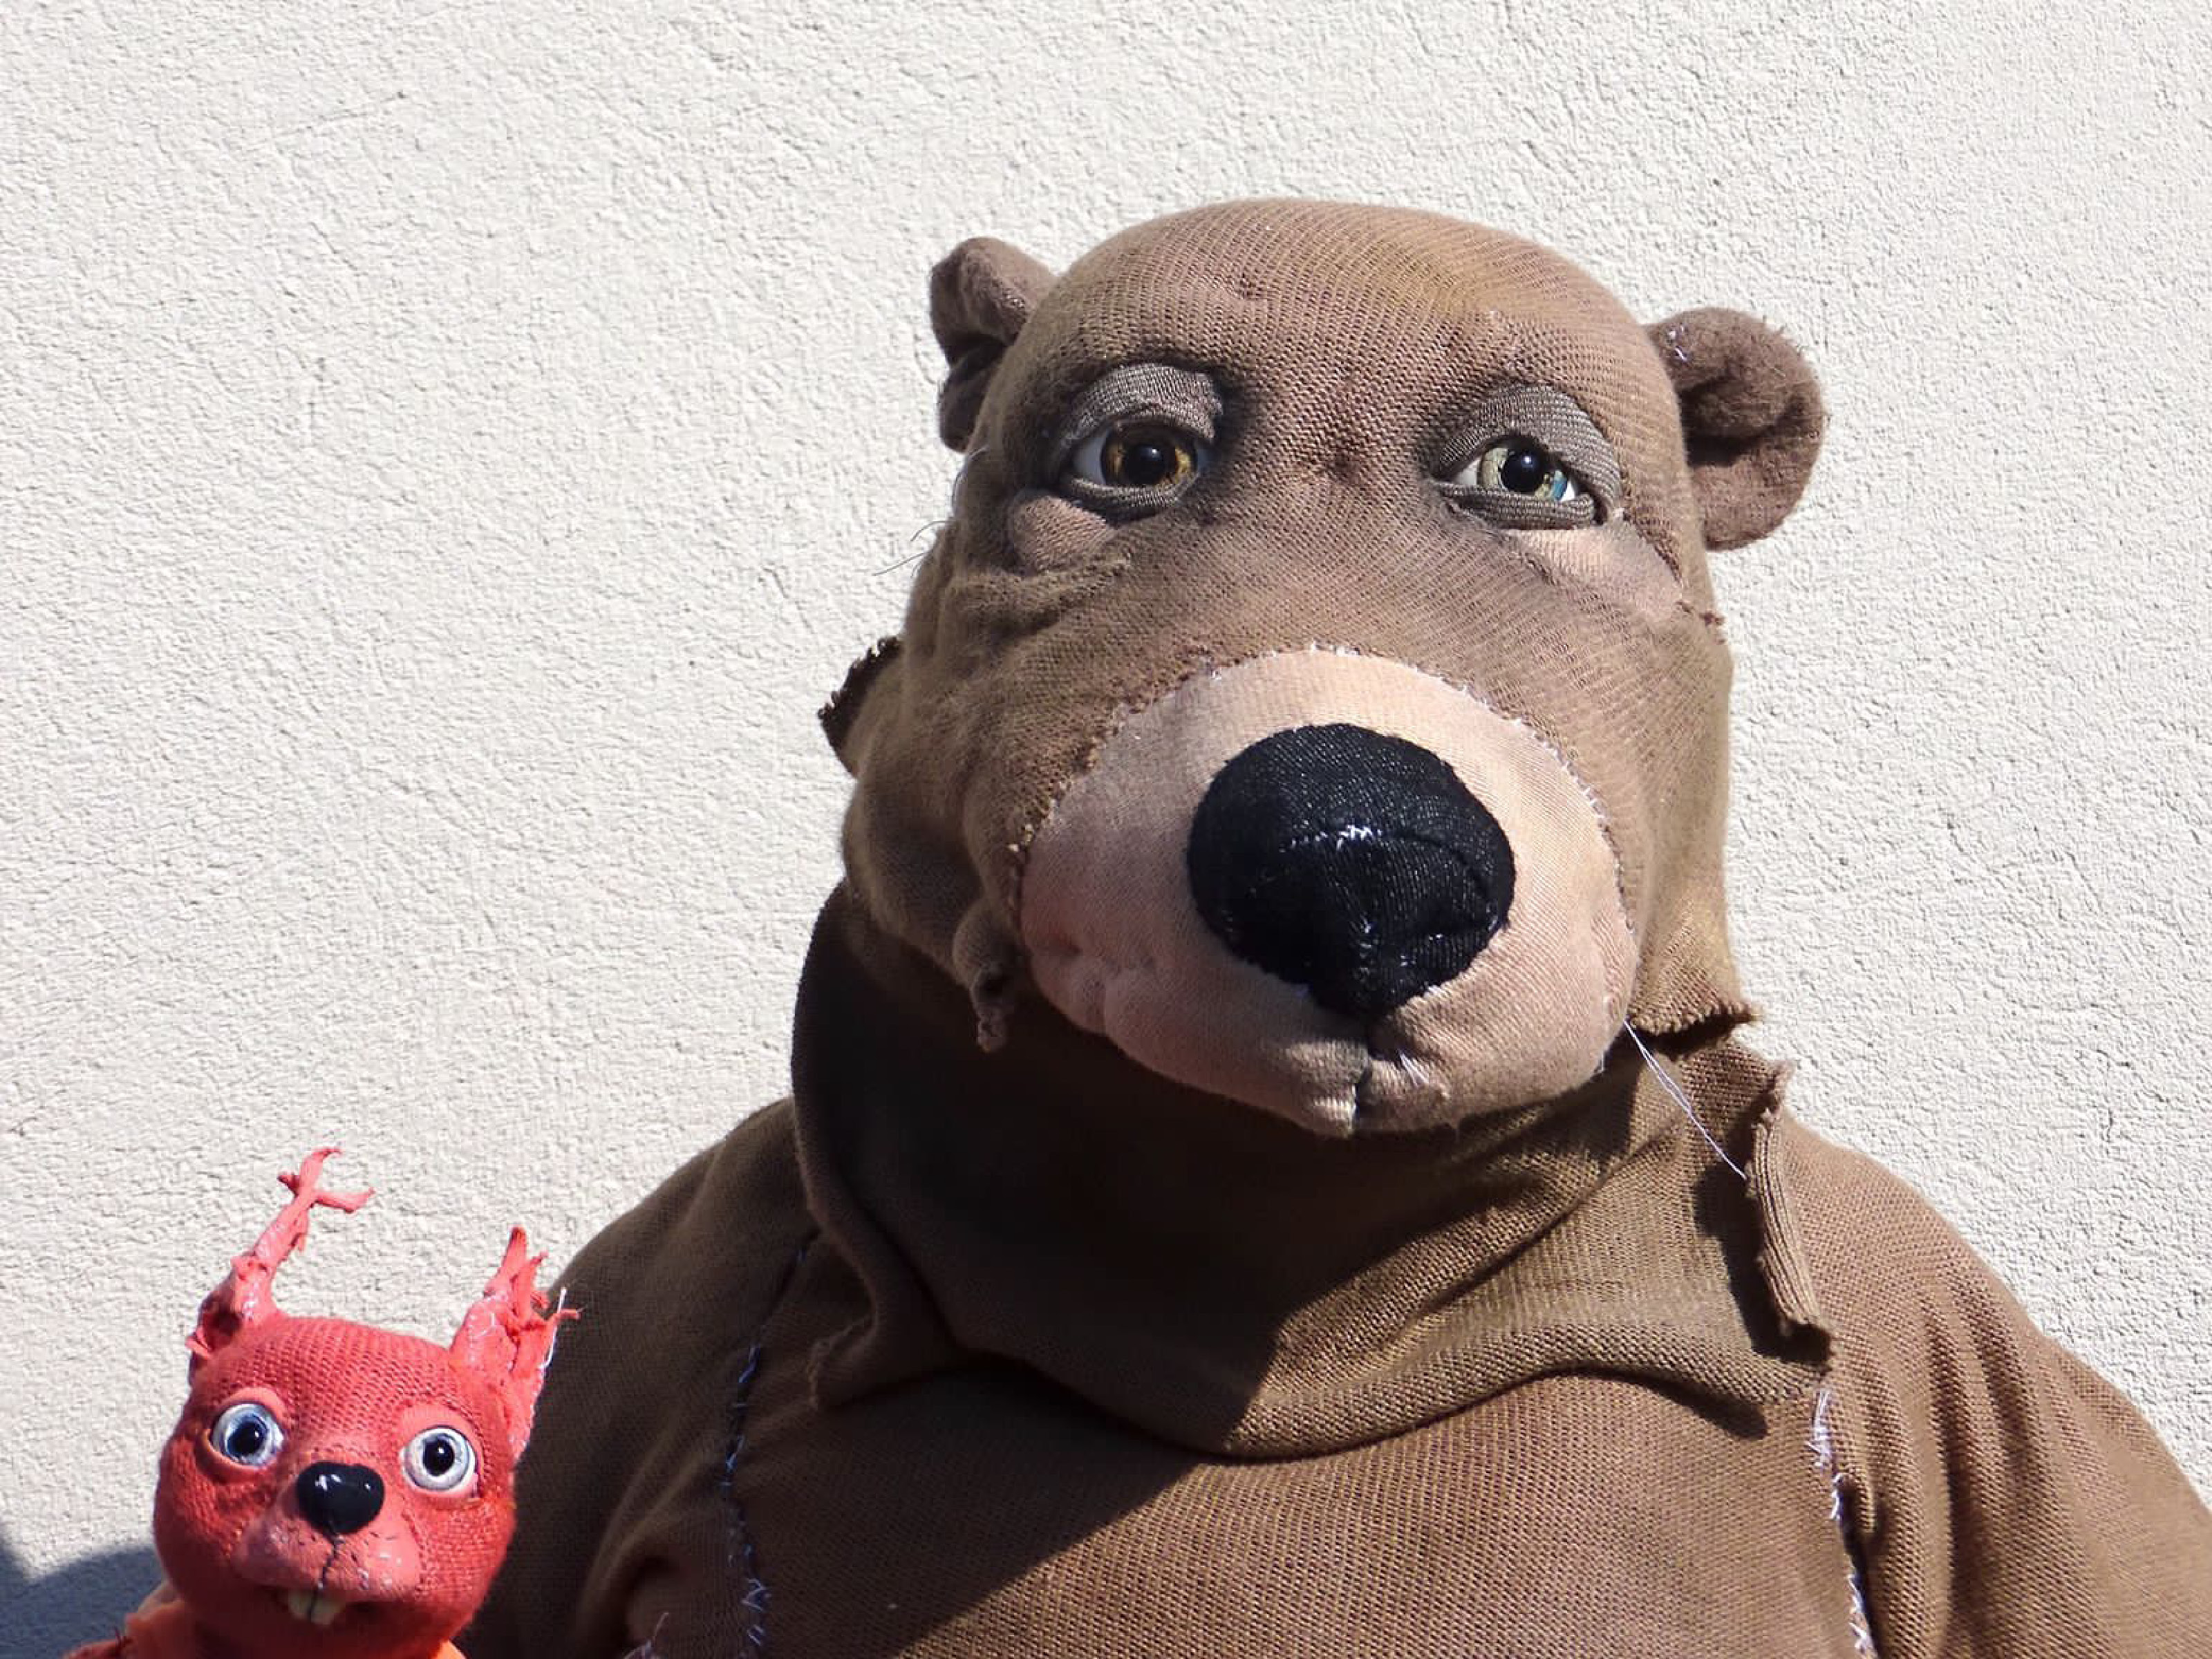 The puppets of a bear and a squirrel can be seen up to the shoulders. They look curiously into the camera.